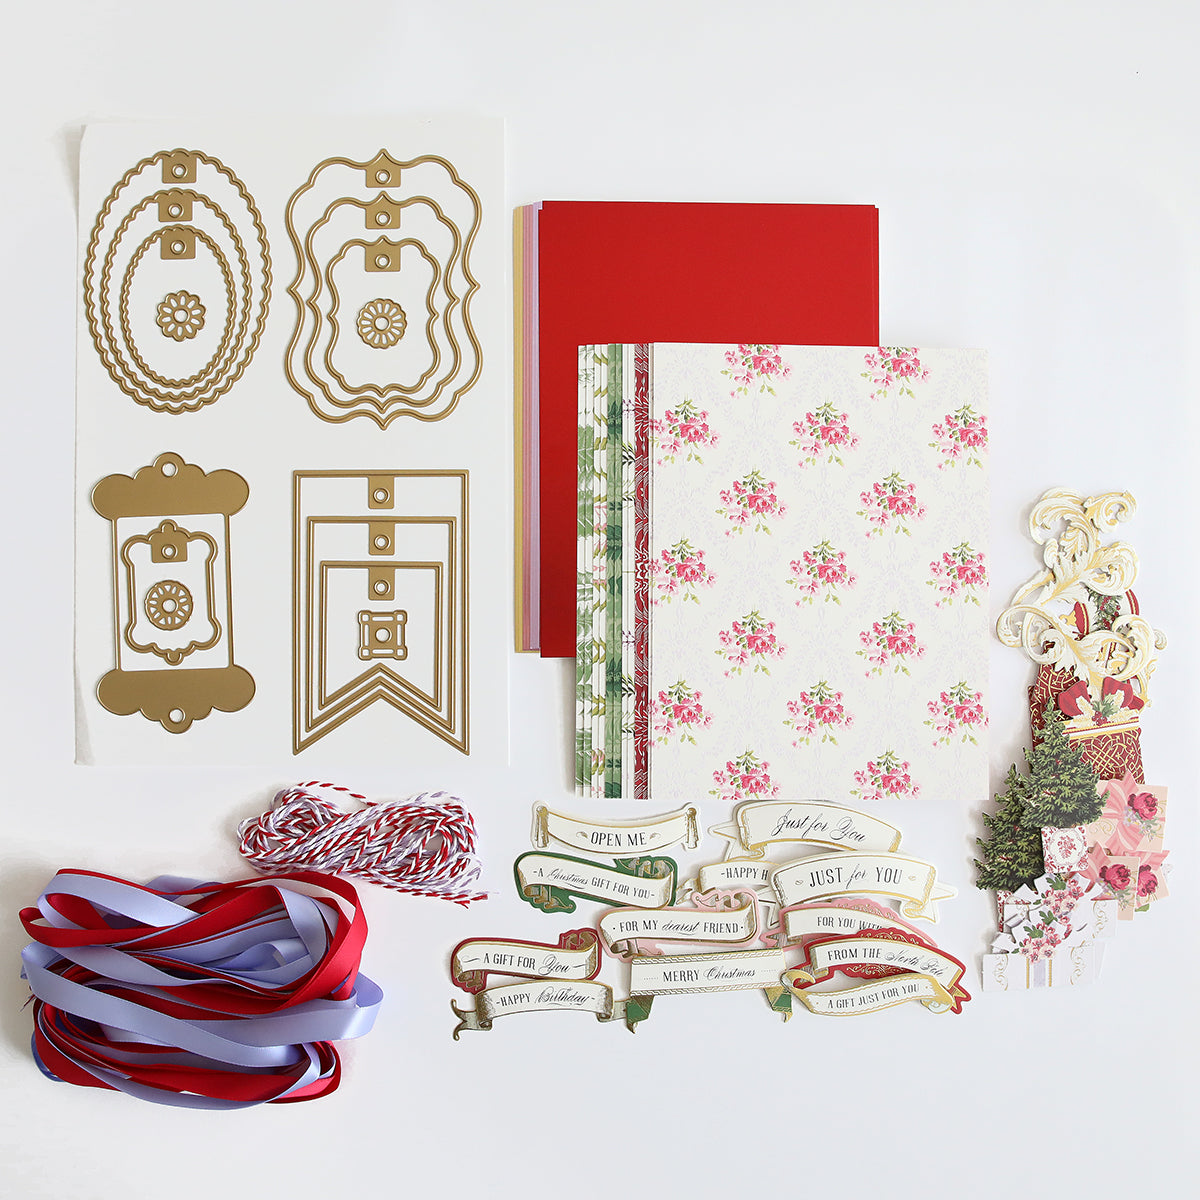 A customizable Christmas card kit with handmade and custom tags, adorned with ribbons. The Anna Griffin Gift Tag Compendium Class Materials and Dies, the perfect gift for the holiday season.